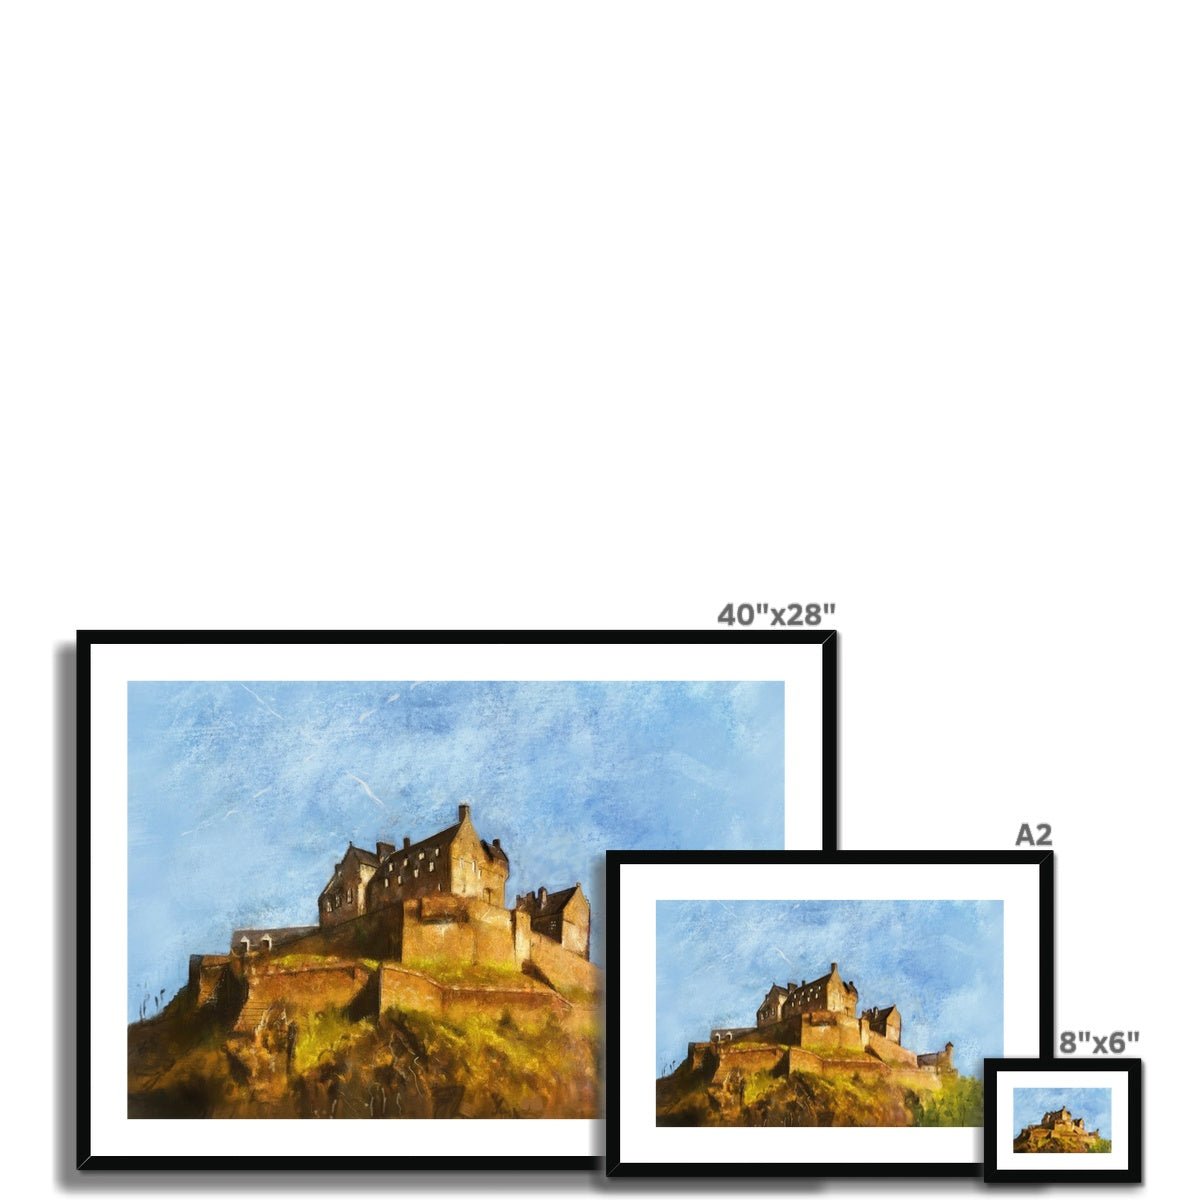 Edinburgh Castle Painting | Framed & Mounted Prints From Scotland-Framed & Mounted Prints-Edinburgh & Glasgow Art Gallery-Paintings, Prints, Homeware, Art Gifts From Scotland By Scottish Artist Kevin Hunter